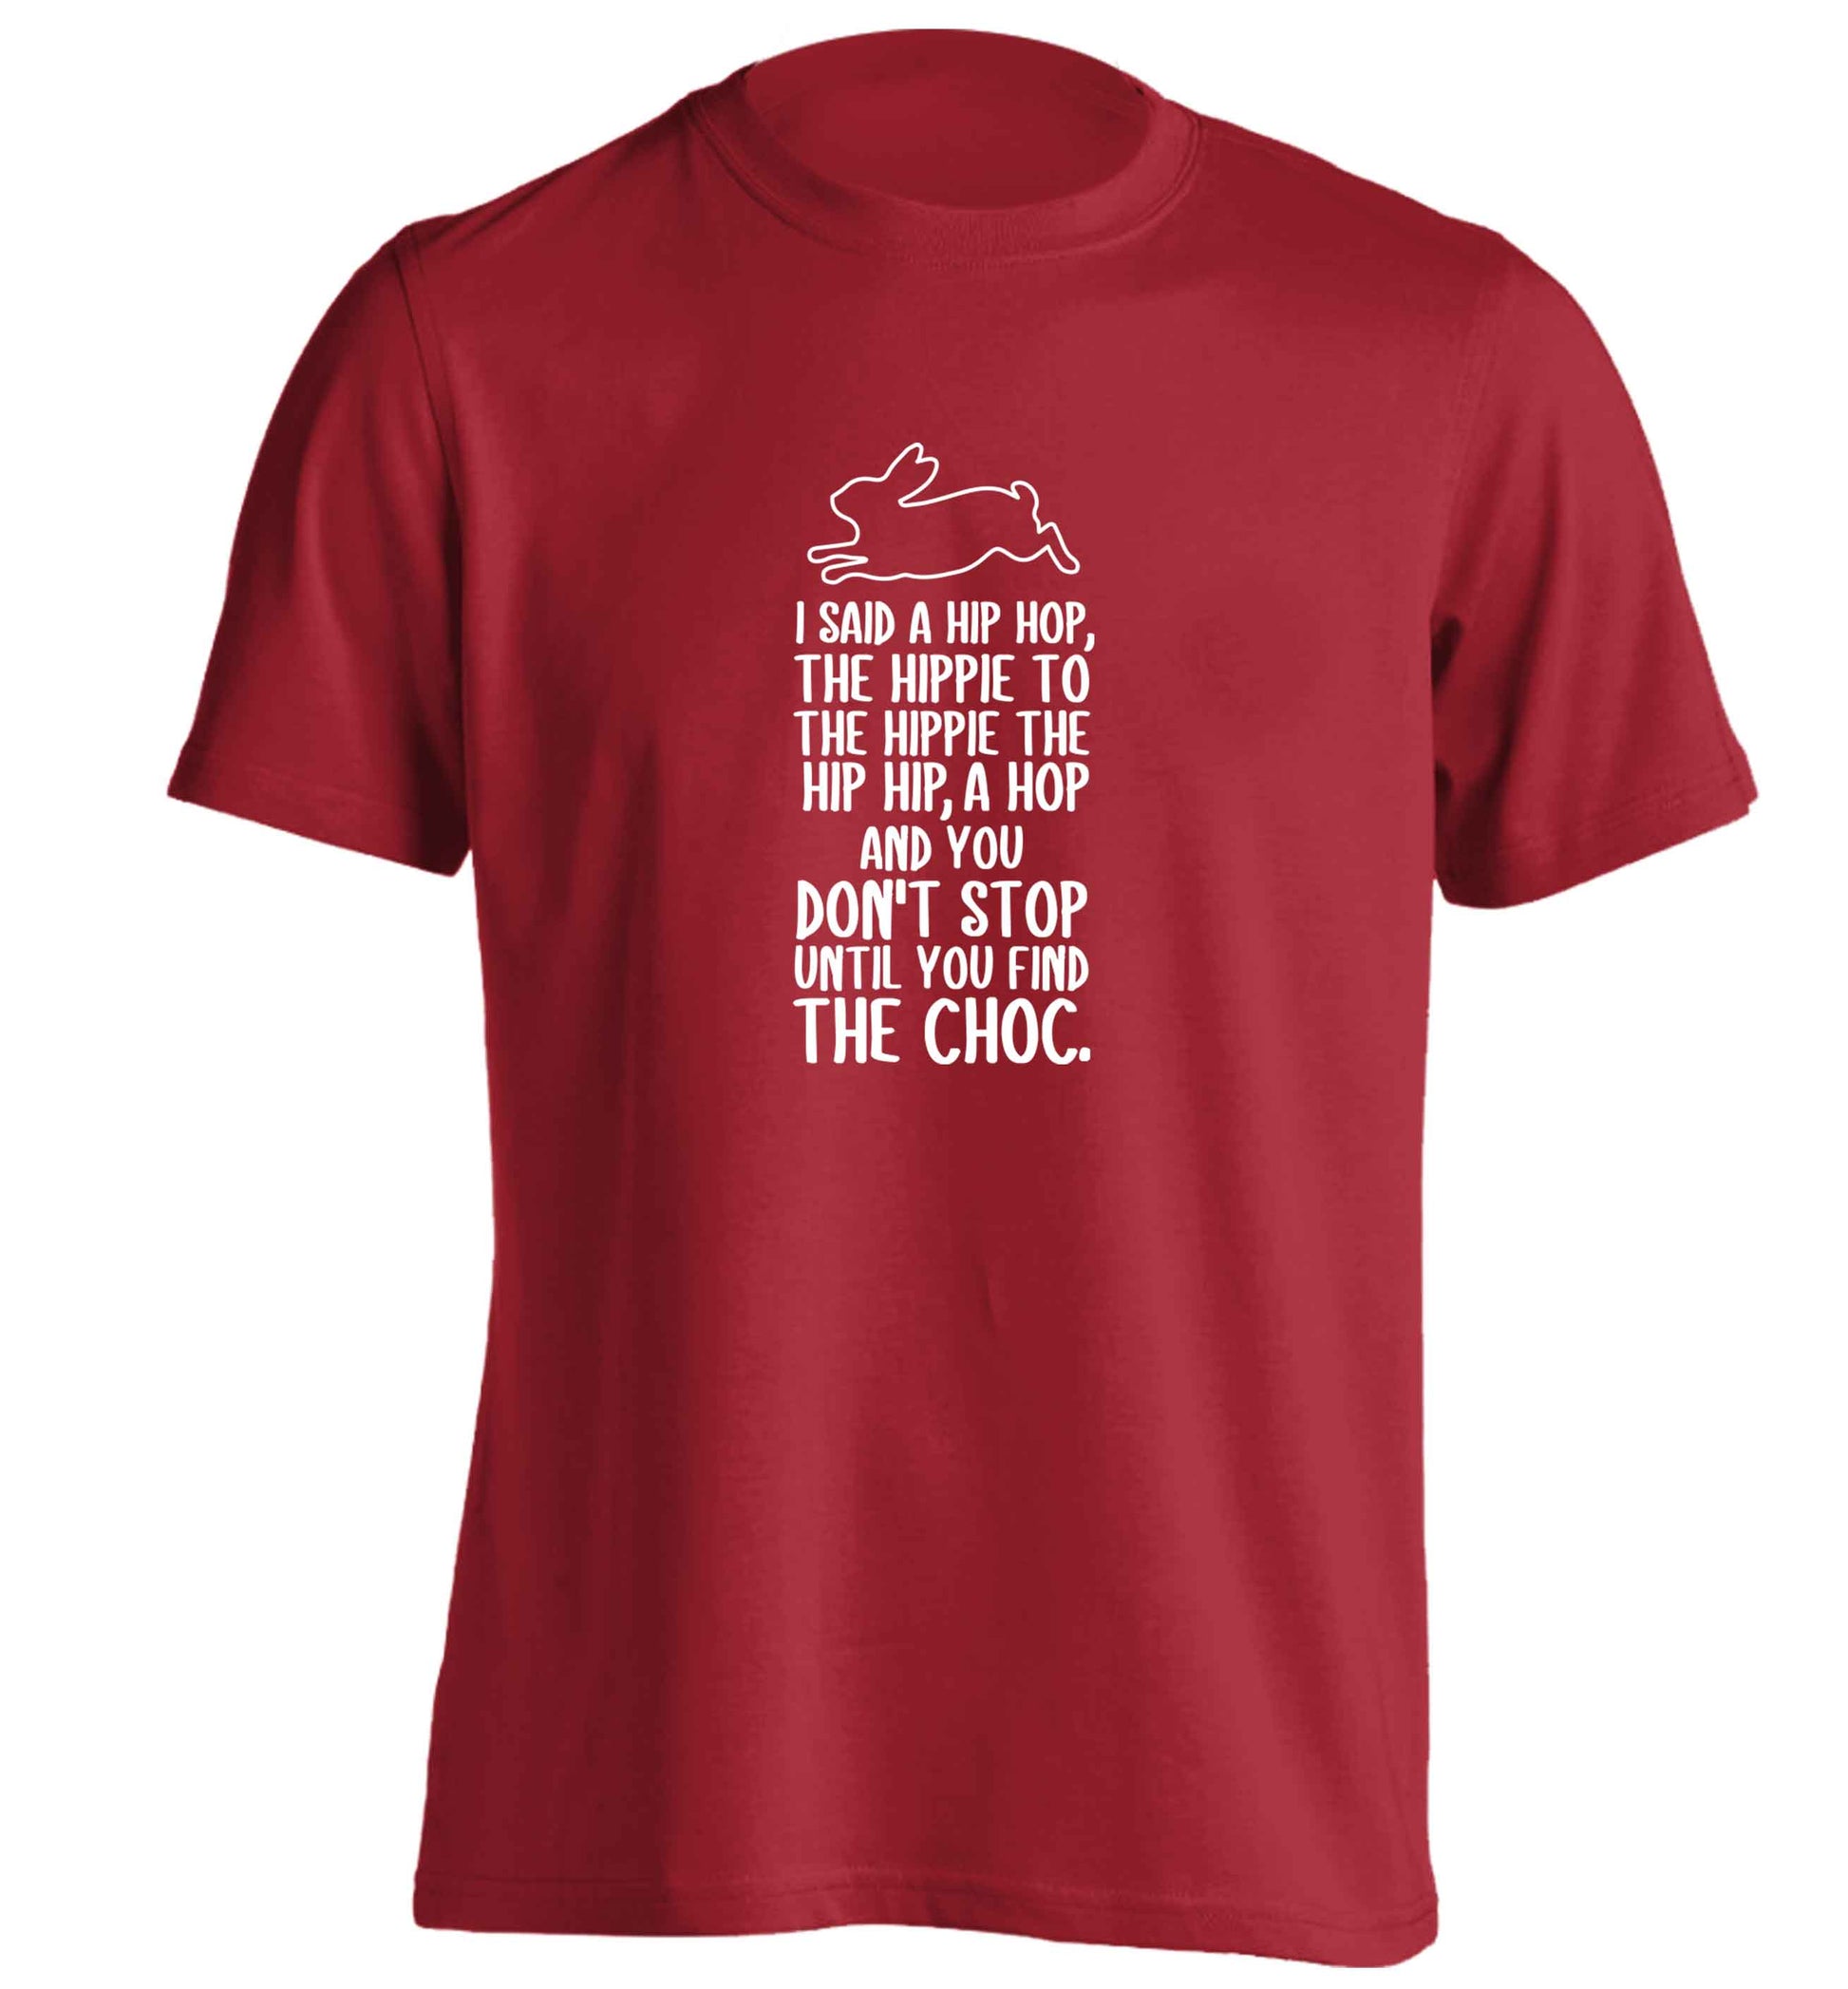 Don't stop until you find the choc adults unisex red Tshirt 2XL